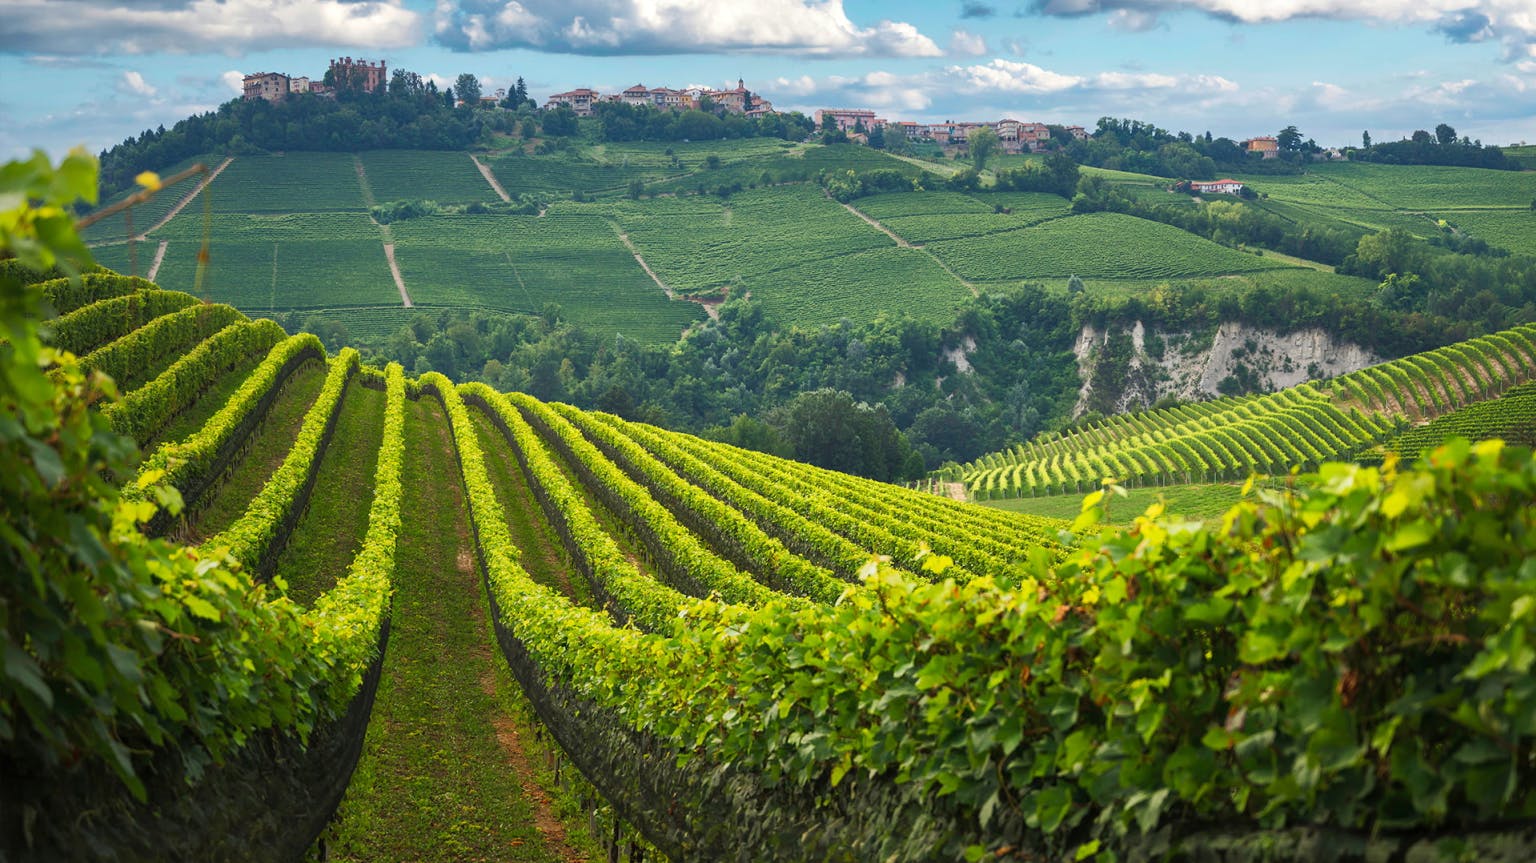 The sub-regions of Barolo and their very different flavour profiles